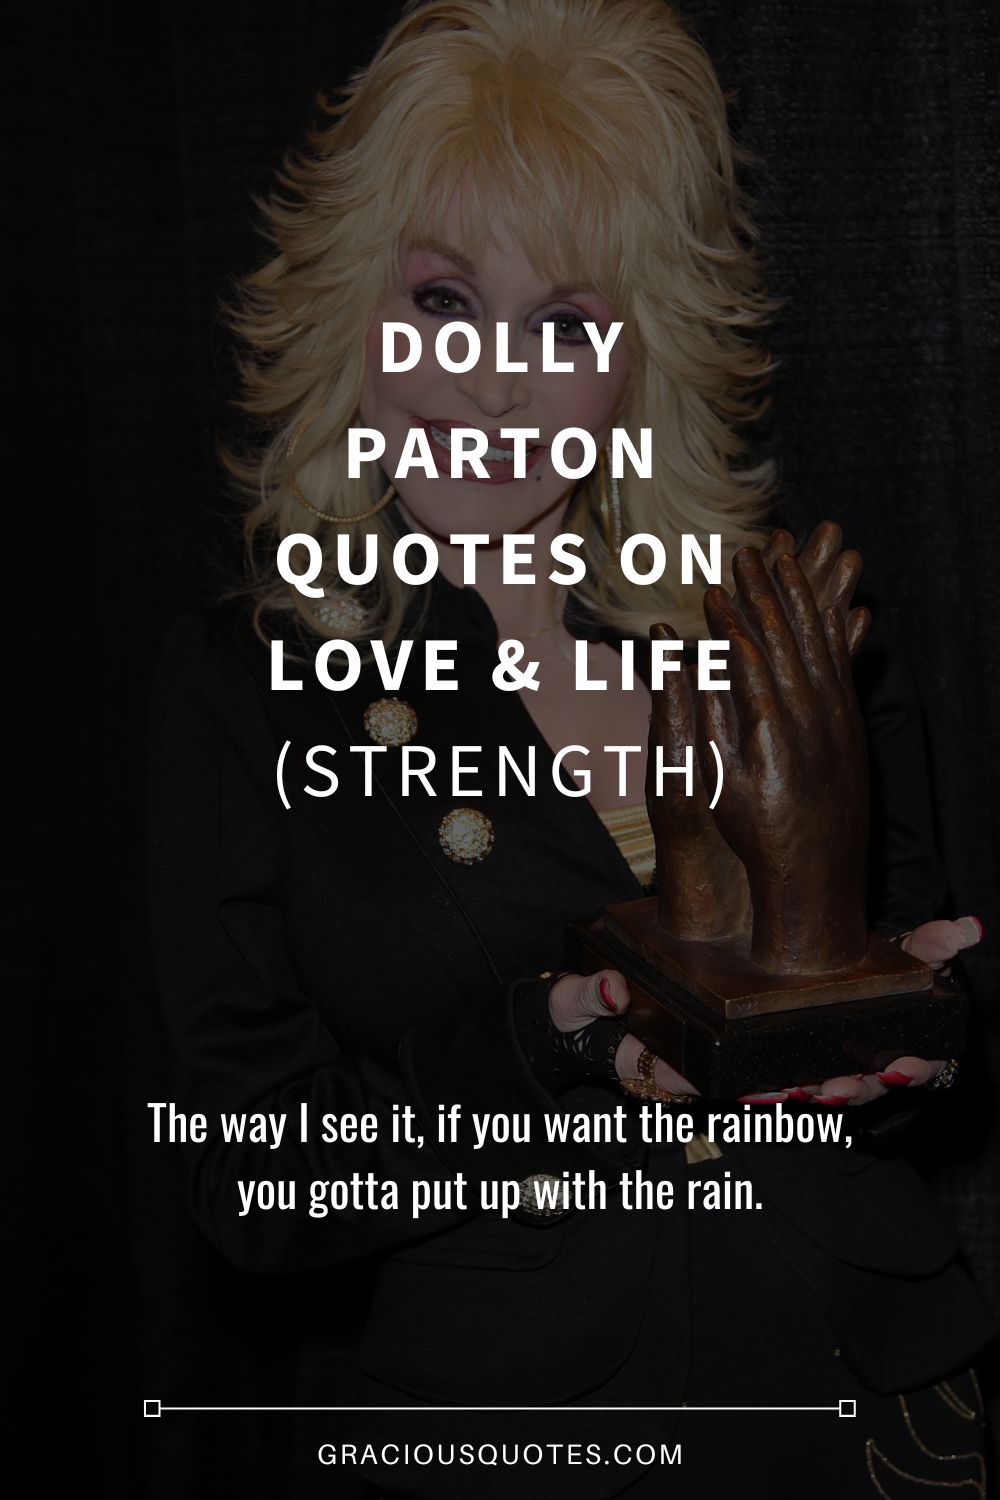 Dolly Parton Quotes on Love & Life (STRENGTH) - Gracious Quotes